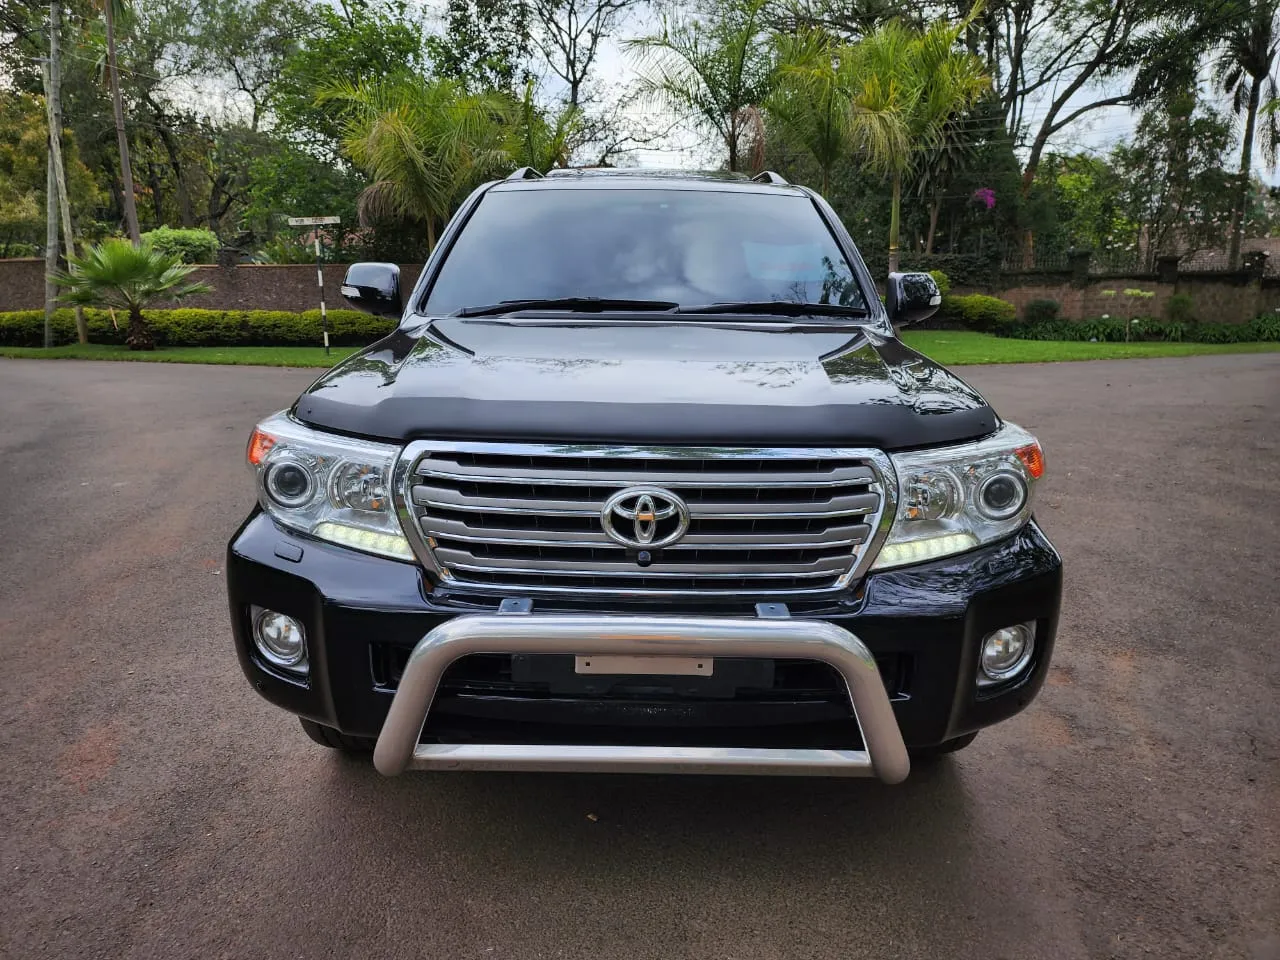 Toyota Land cruiser VX V8 2015 DIESEL SUNROOF leather TRADE IN OK EXCLUSIVE